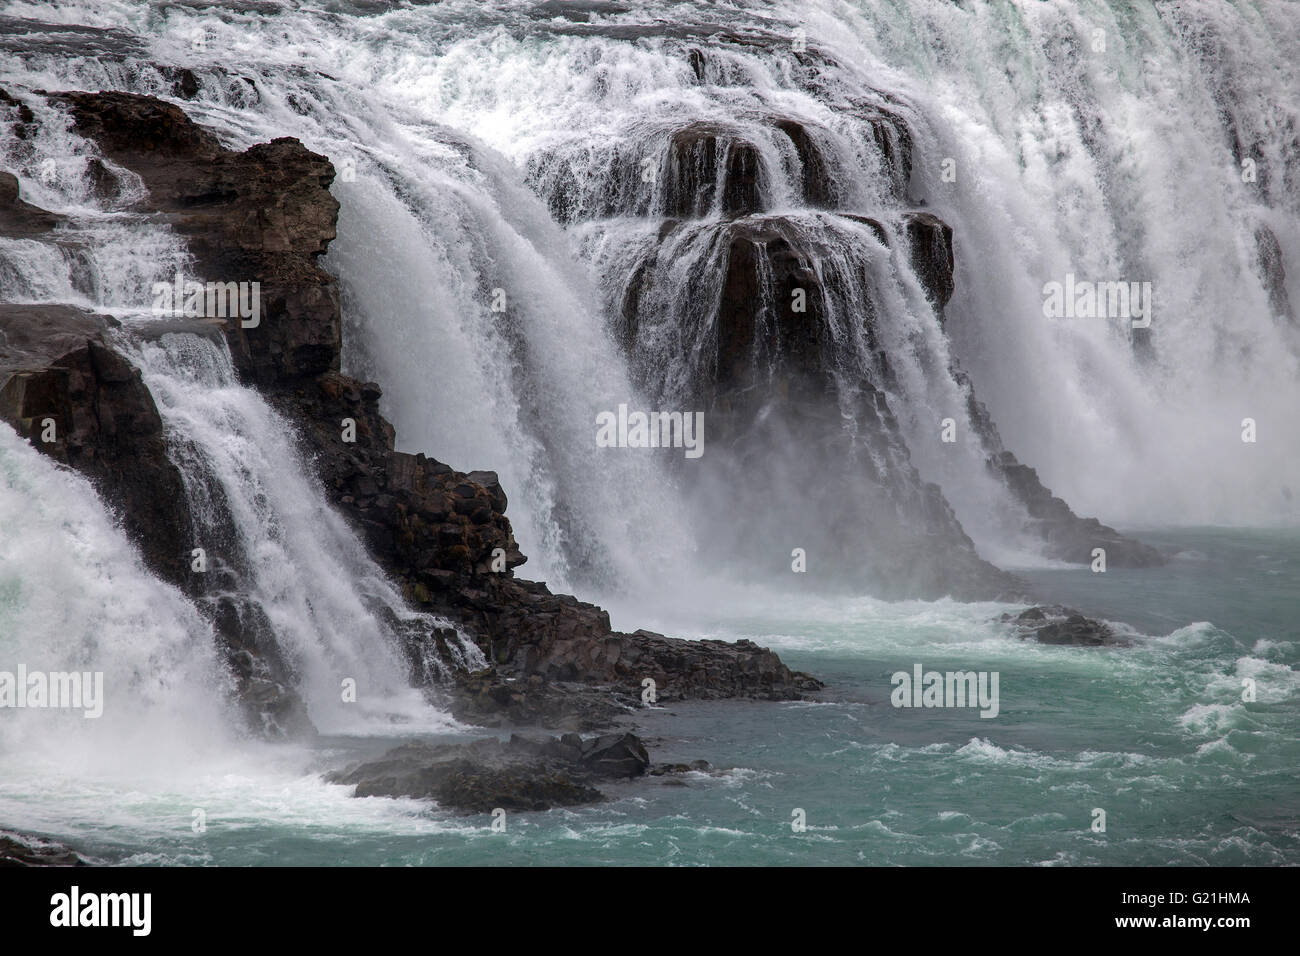 Waterfall, Gullfoss, detail, tourist attractions, Golden Circle Route, Iceland Stock Photo